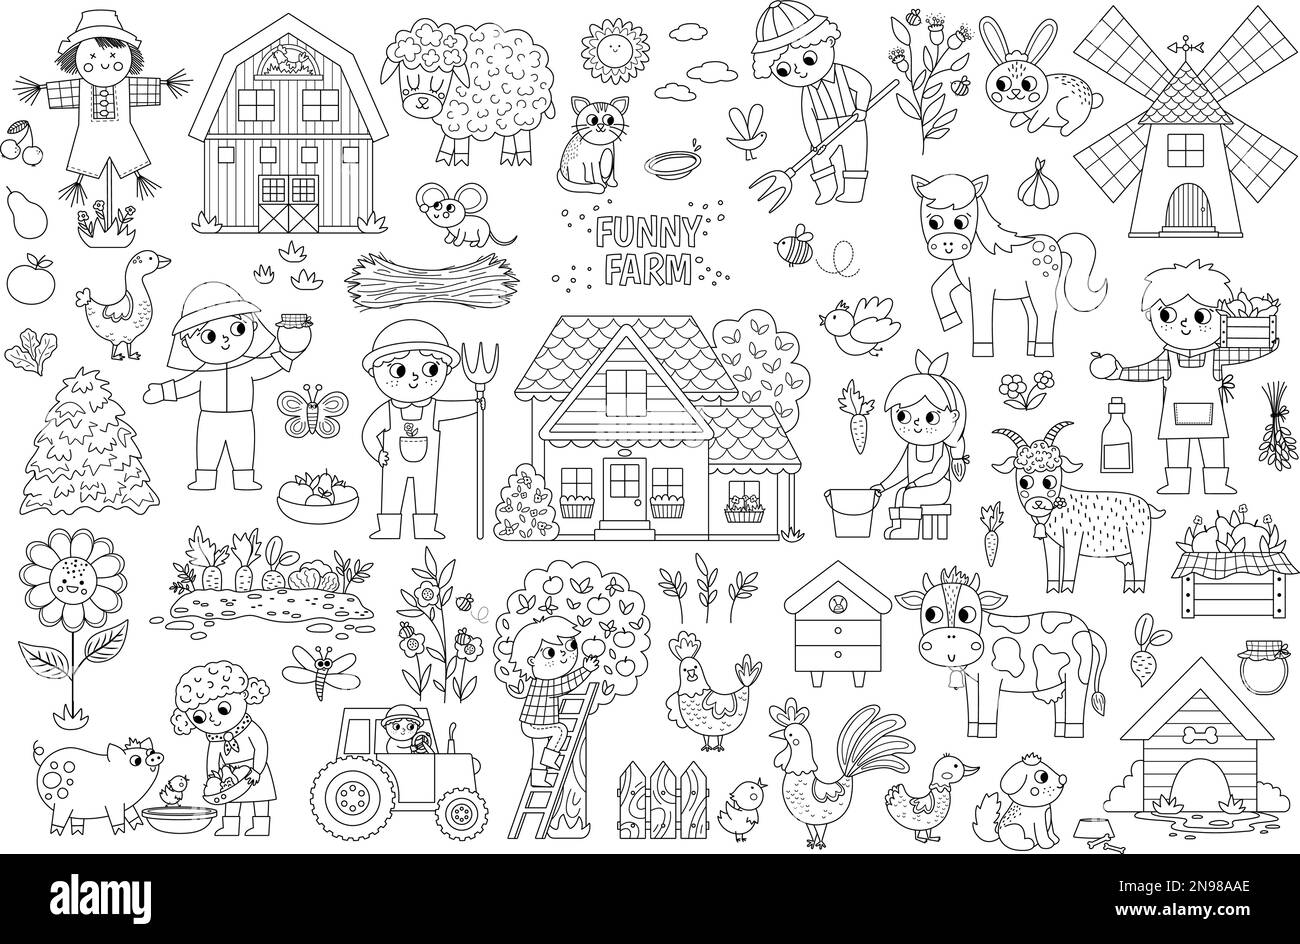 Big black and white vector farm set. Rural line icons collection with funny kid farmers, barn, country house, animals, birds, tractor, windmill. Cute Stock Vector